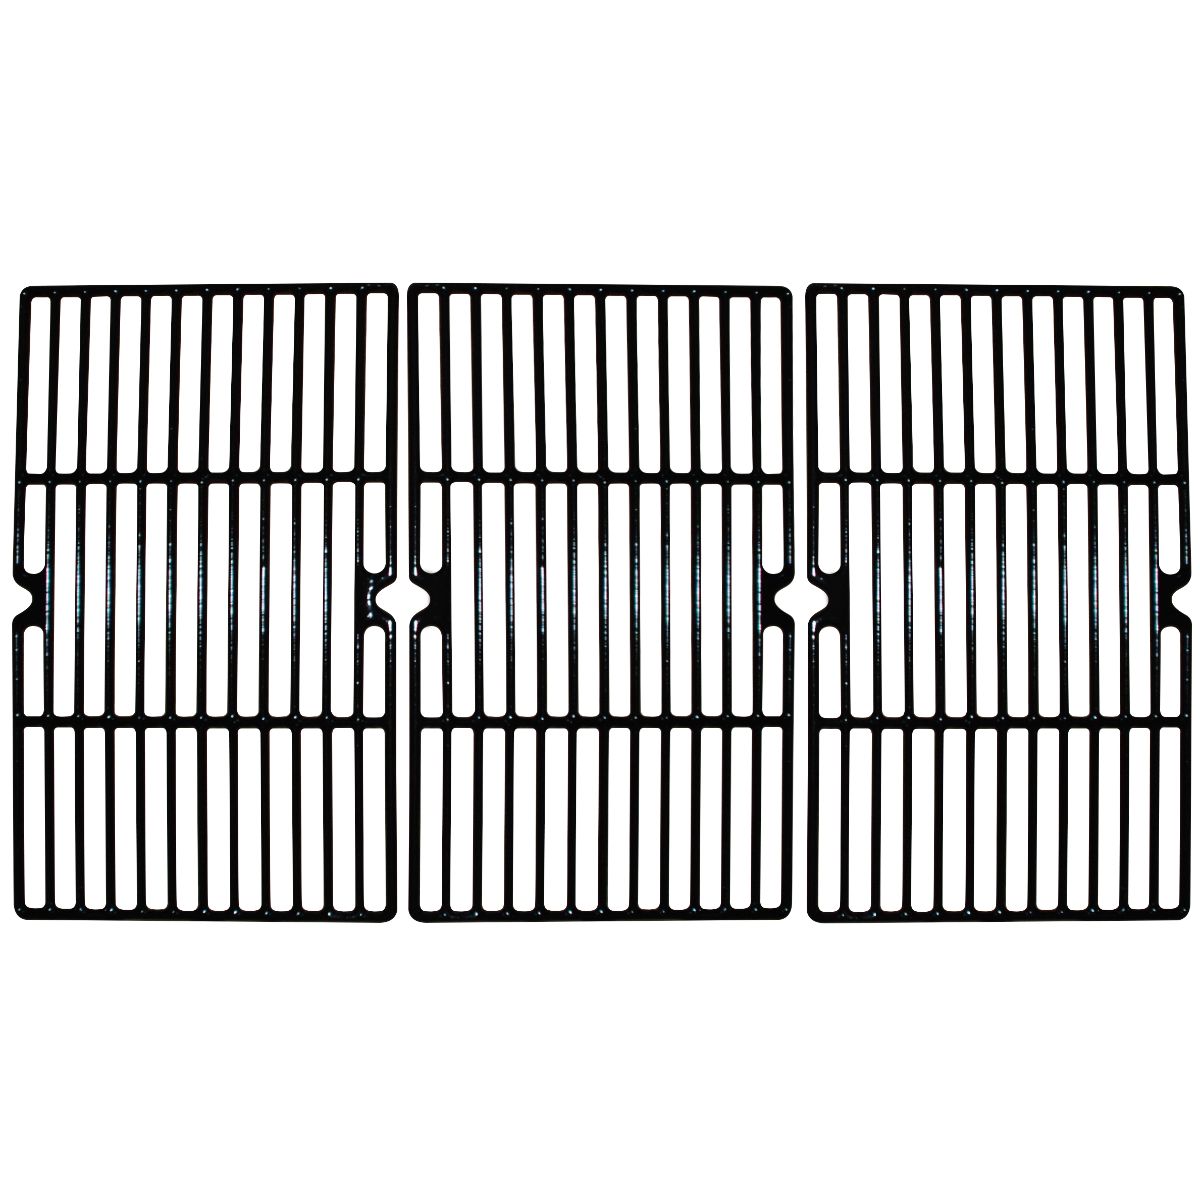 Gloss cast iron cooking grid for Backyard Grill, Better Homes & Gardens, Uniflame brand gas grills